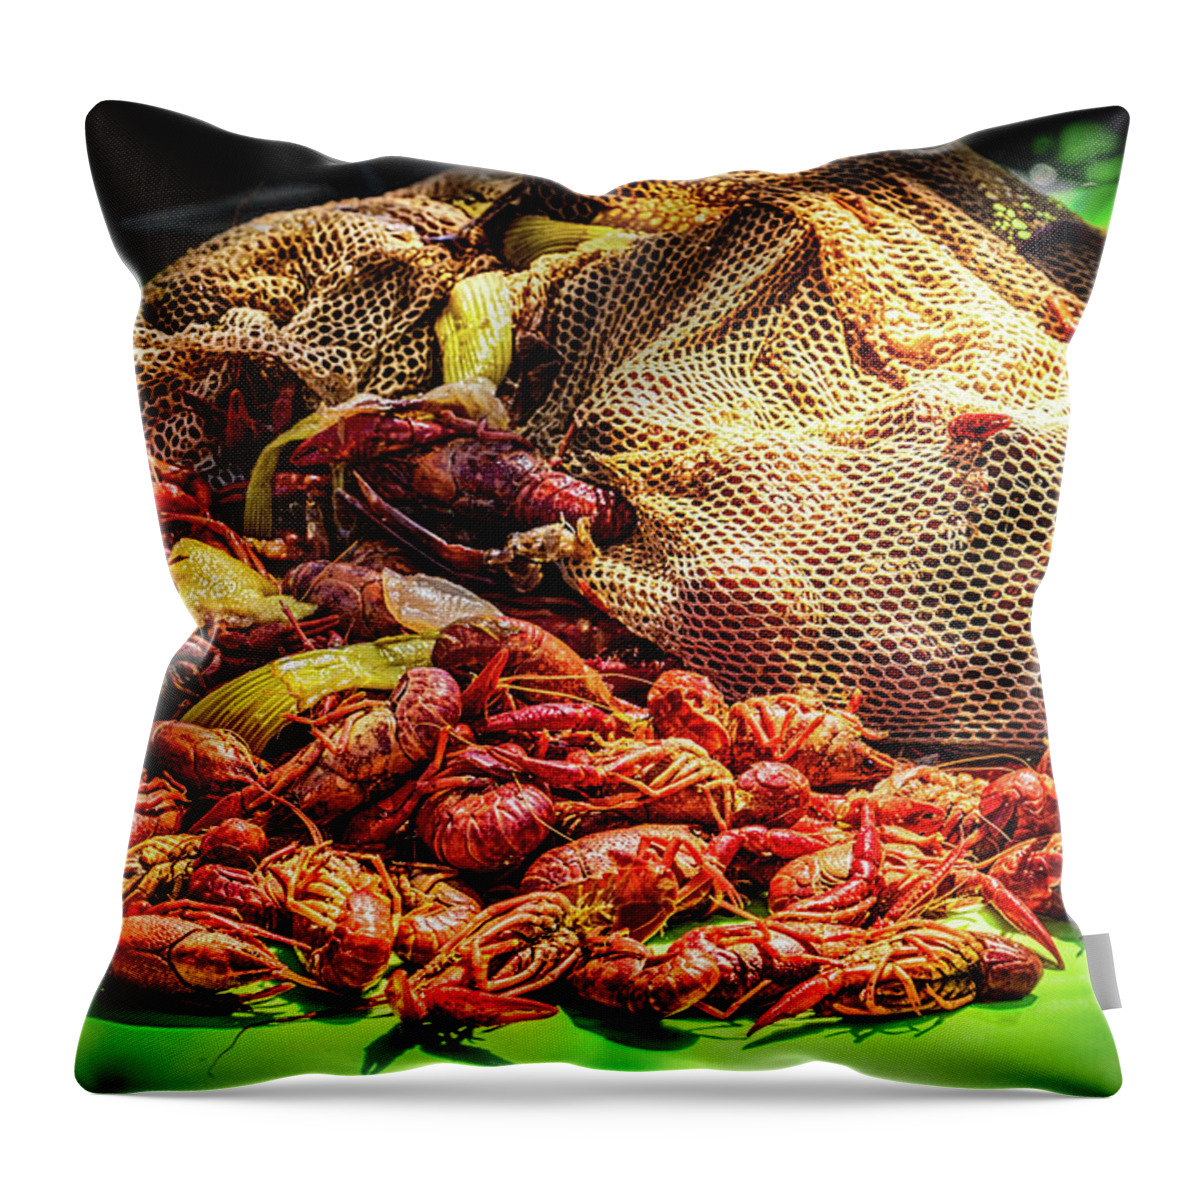 Boil Throw Pillow featuring the photograph Crawfish 2 by Bill Chizek